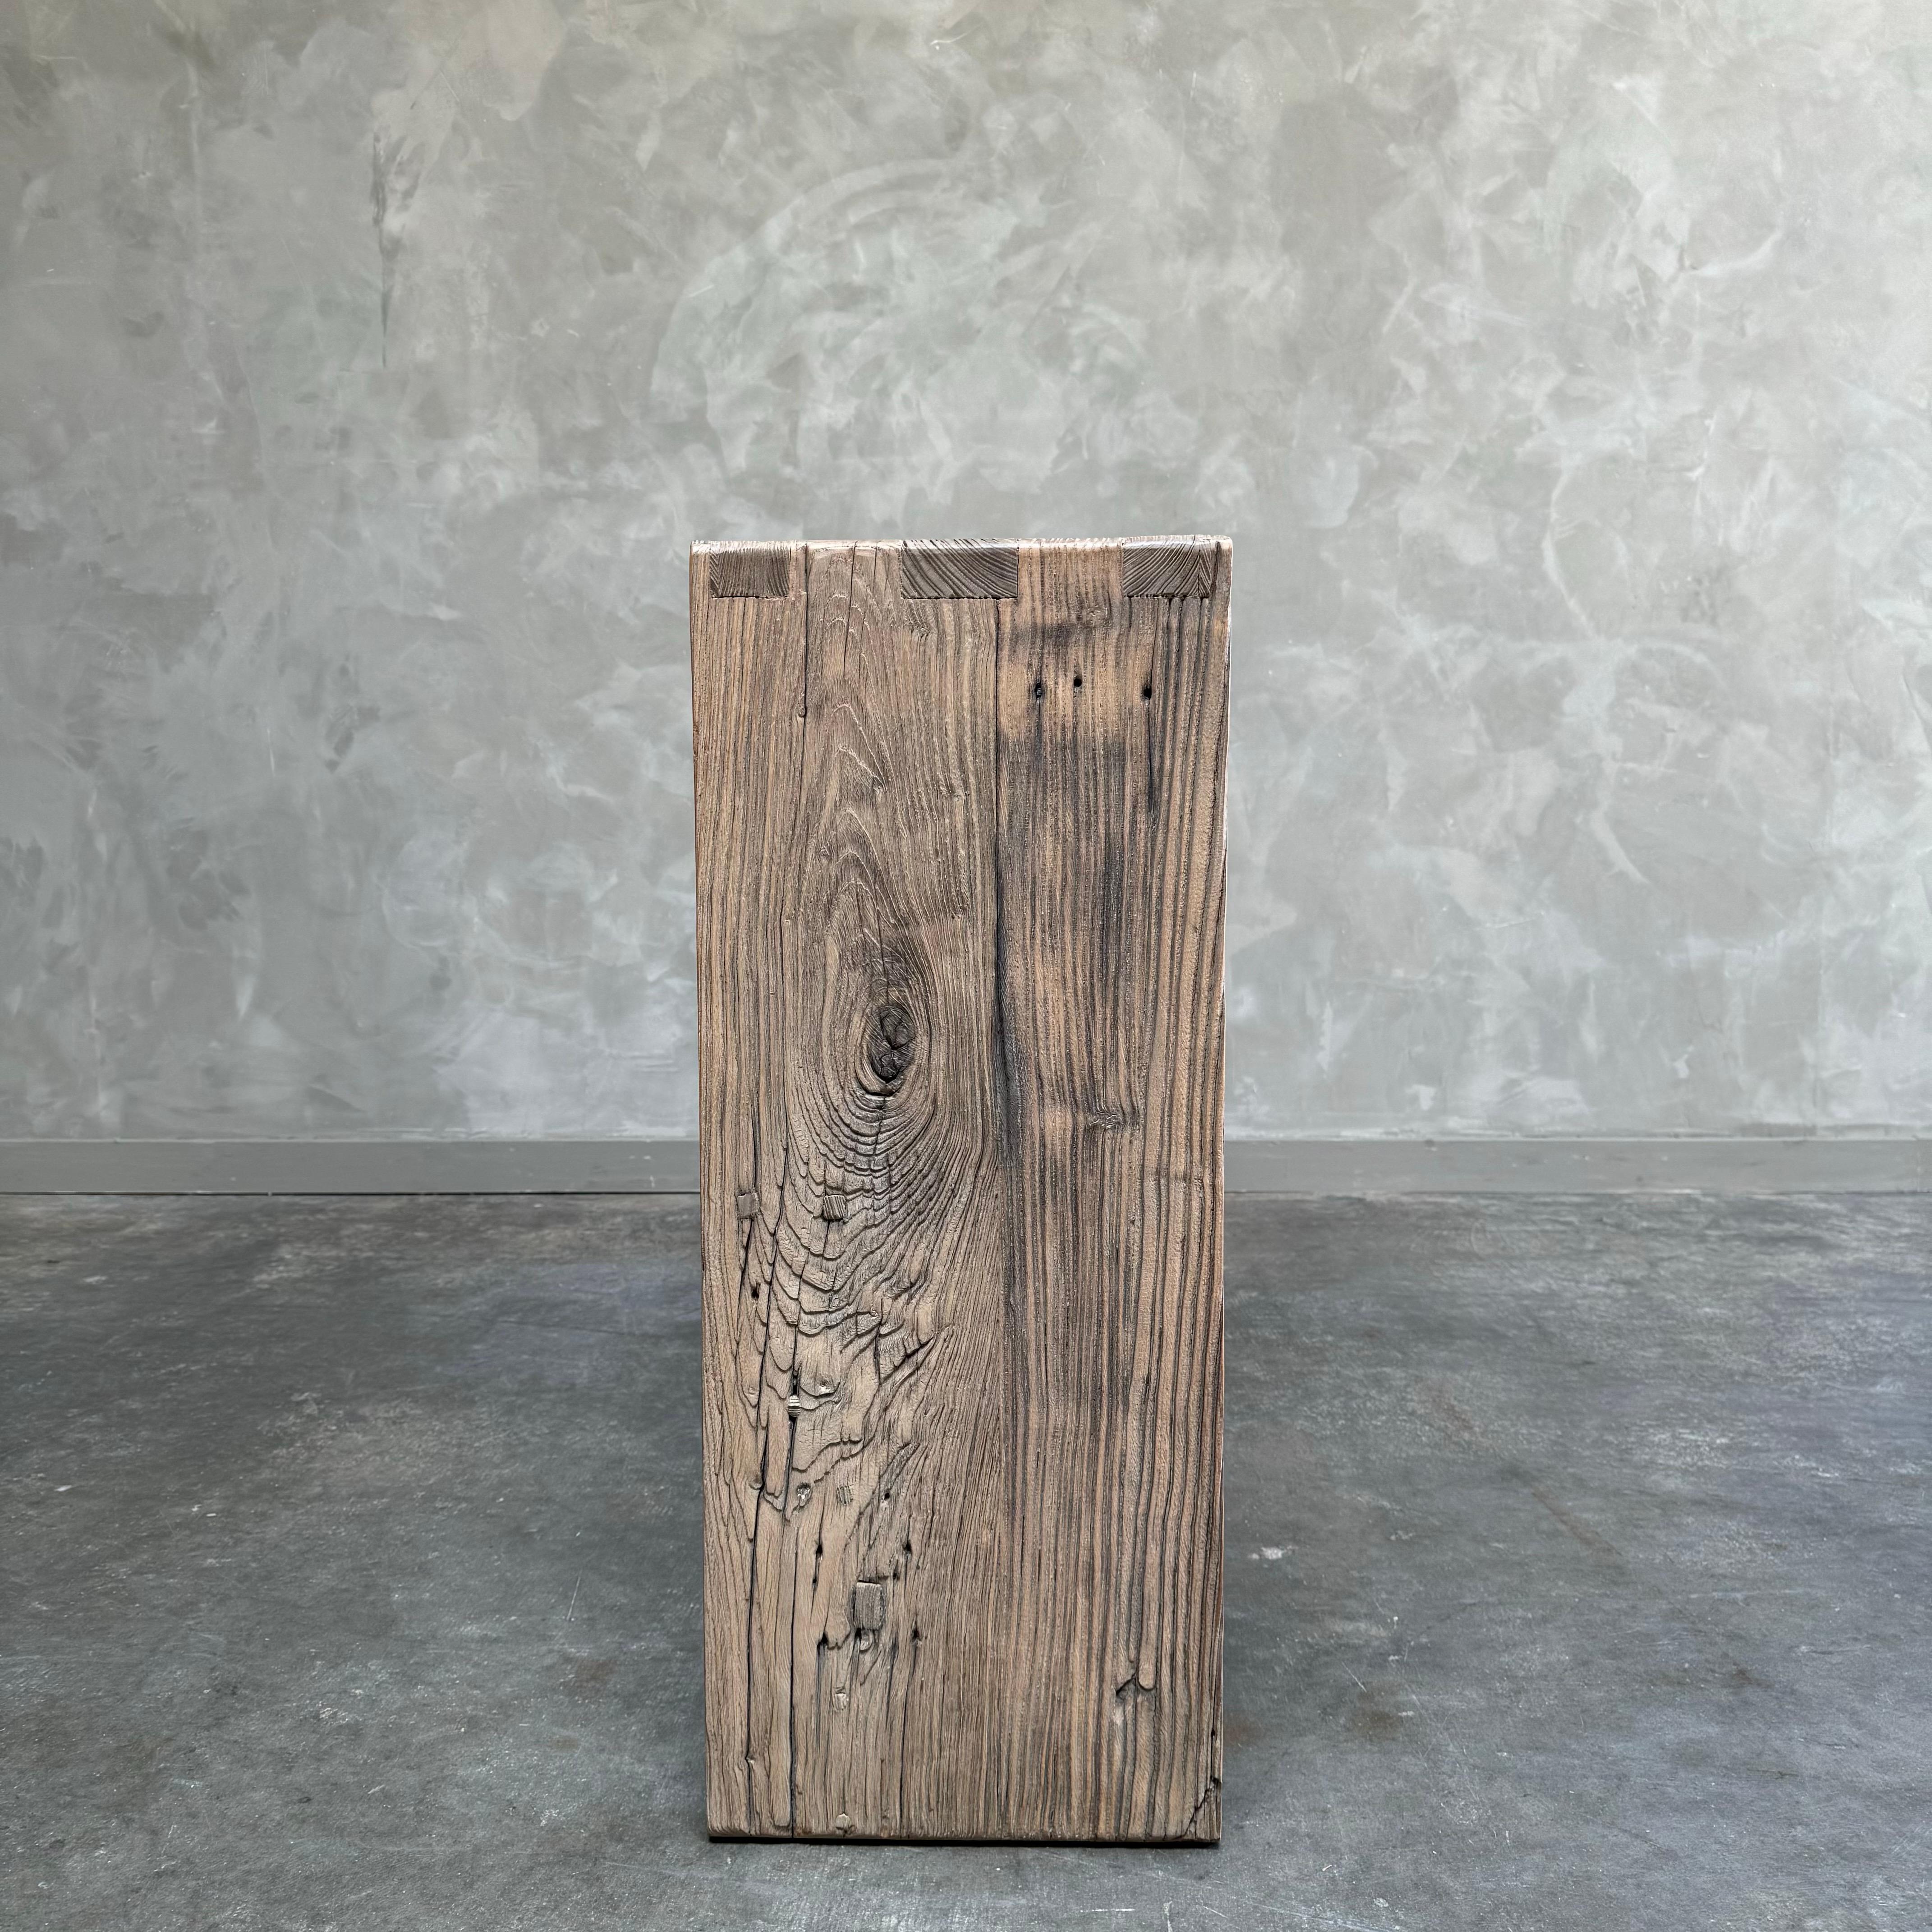 These old elm timbers show in its most primal, natural form. The artisanal construction methods highlight the elm woods beautiful grain pattern & knots and fissures from its past life. The most authentic materials are hand selected, and hours of